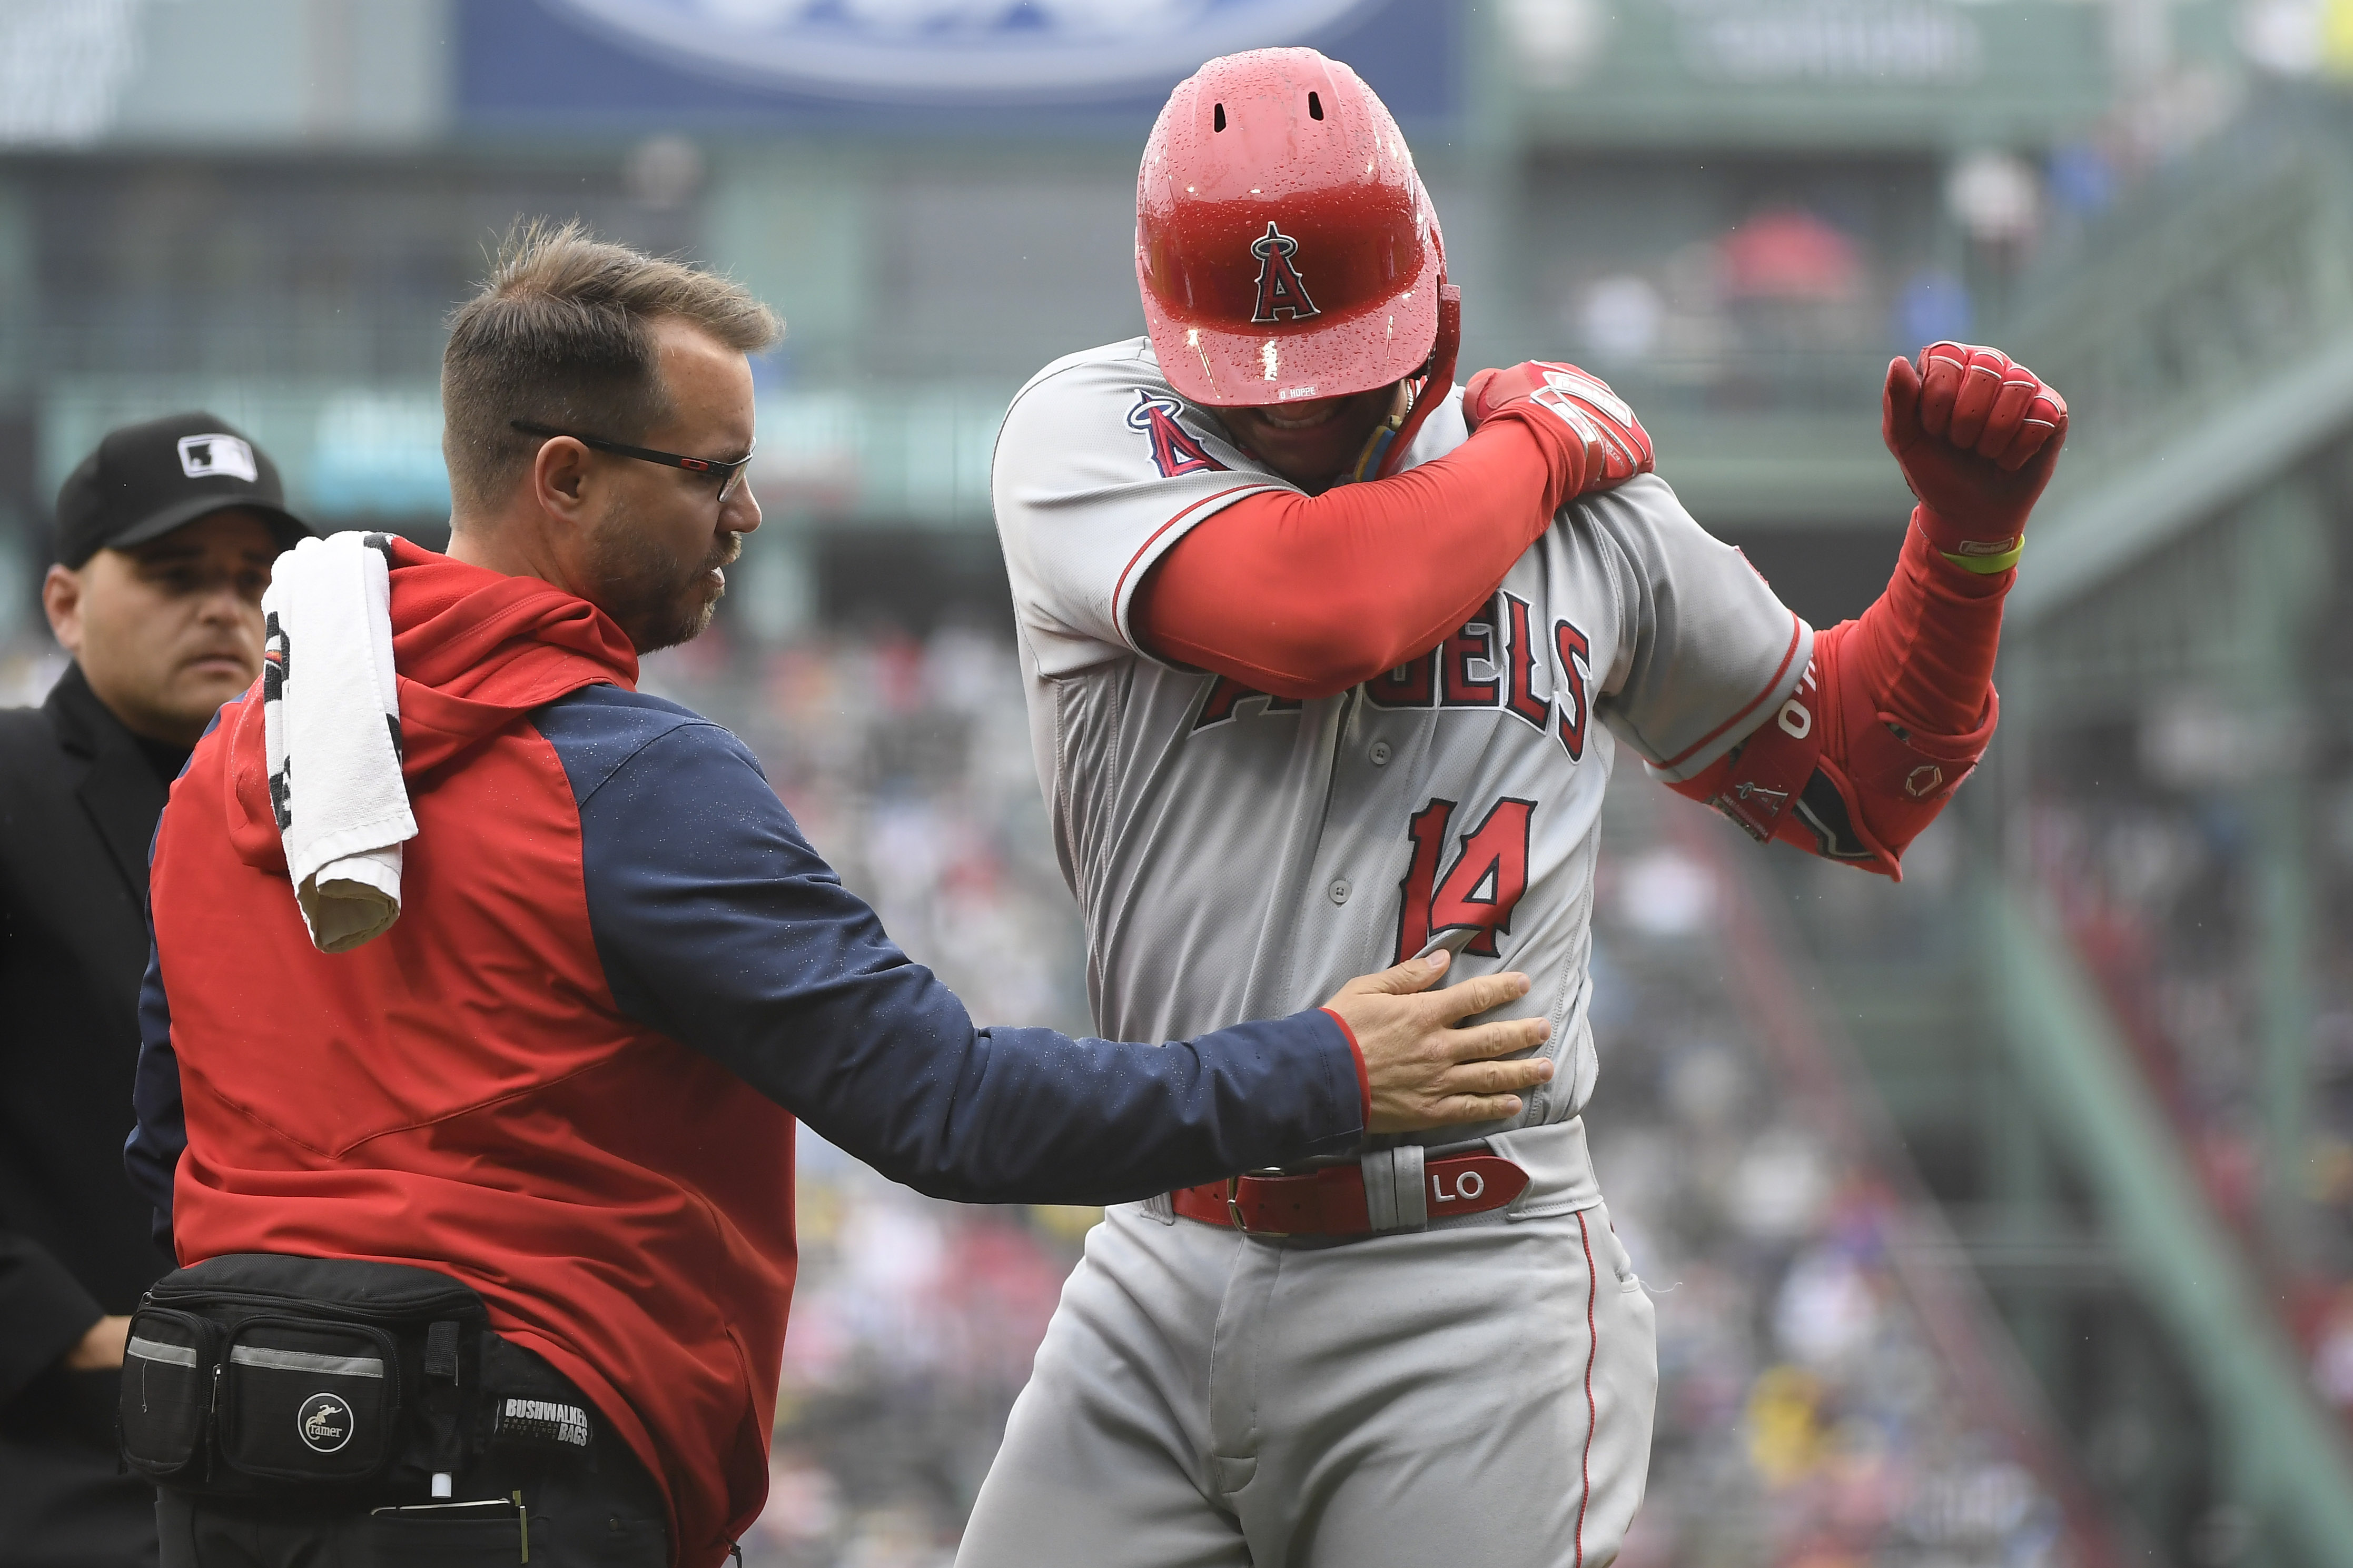 Devers homers, surging Red Sox hold off Ohtani's Angels 5-4